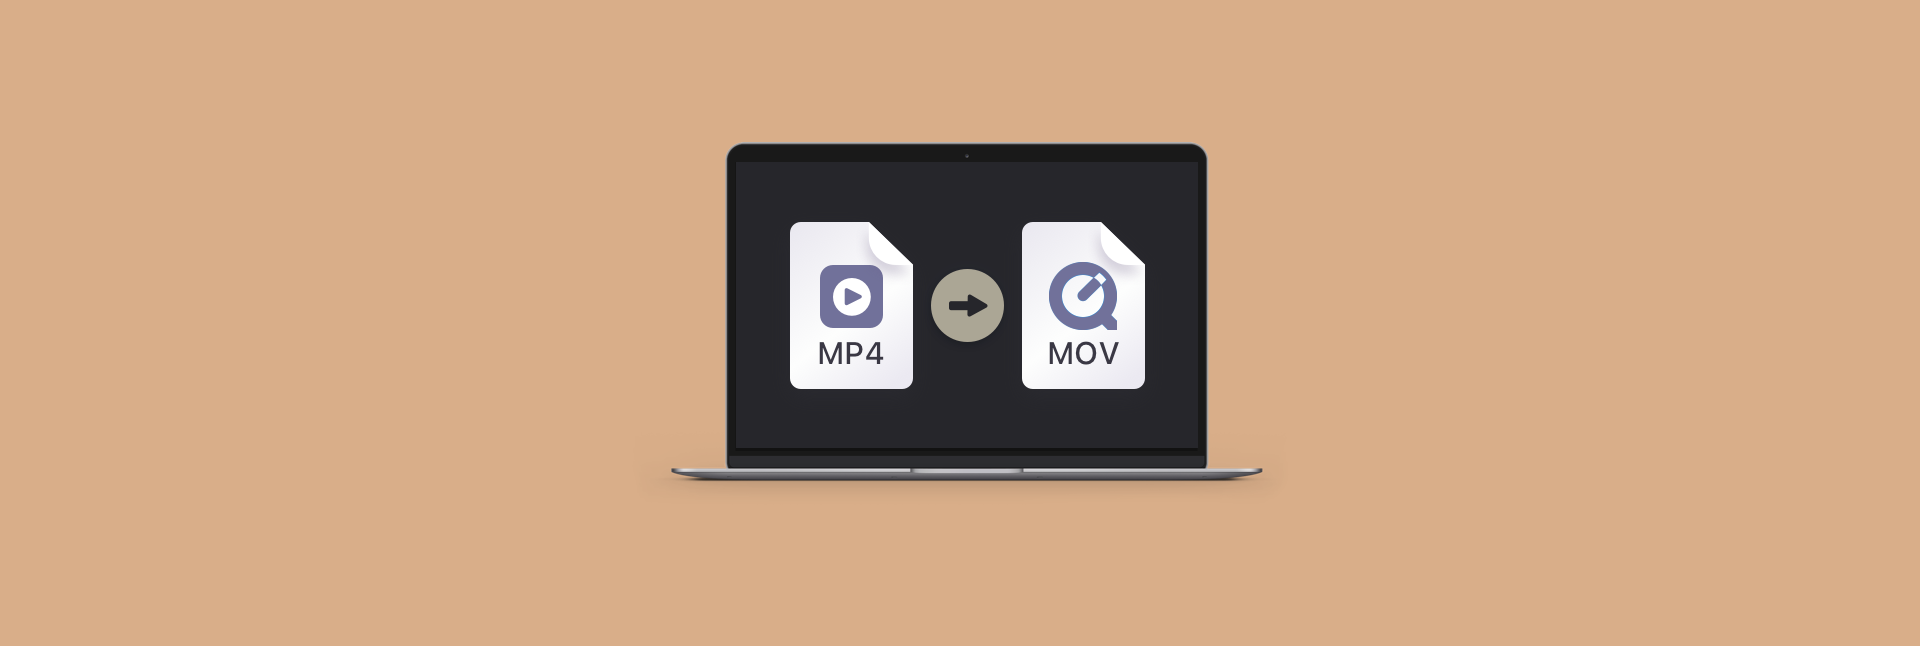 how to play an mp4 file on mac